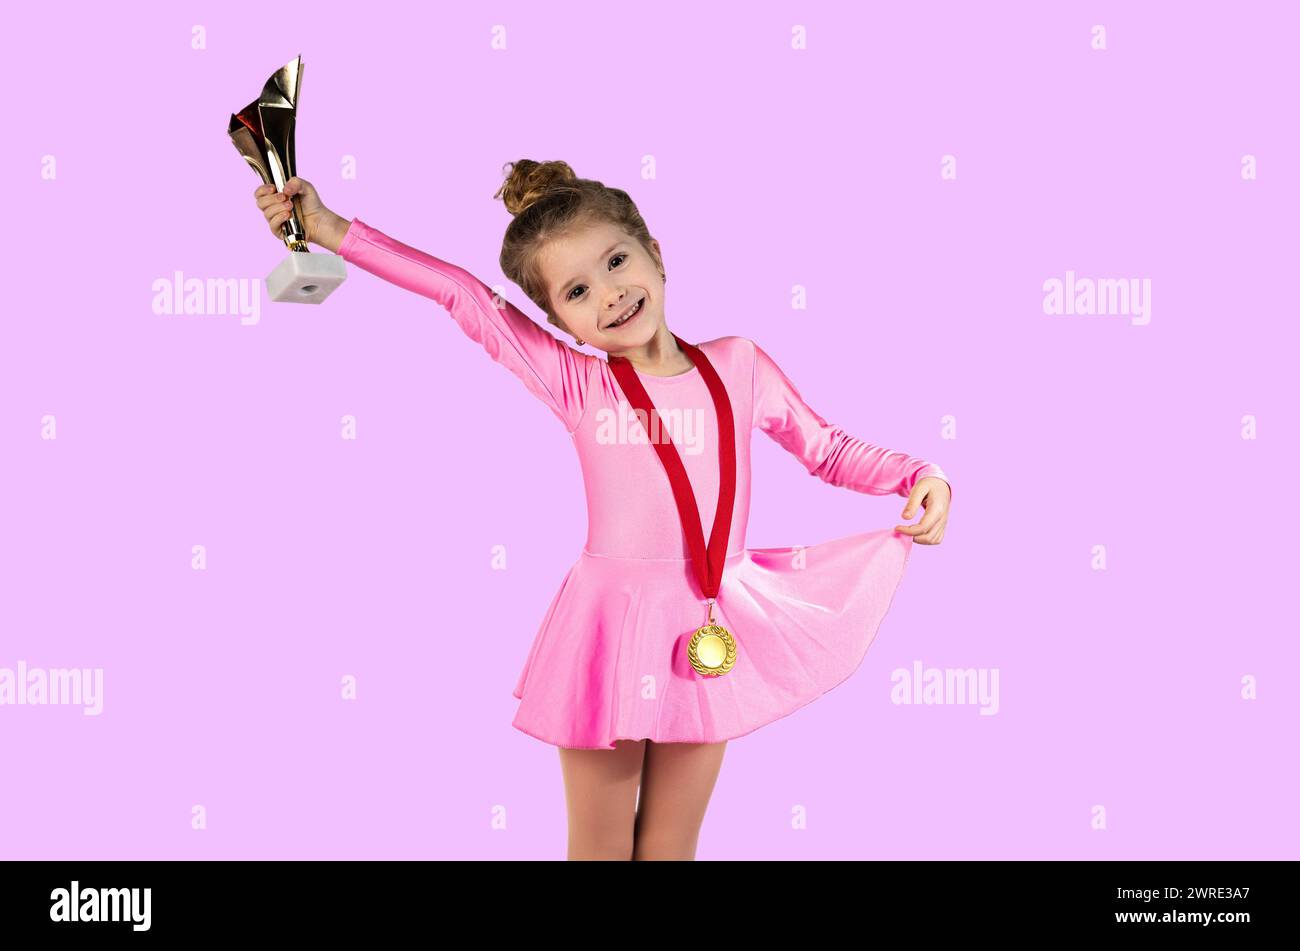 Portrait of a little gymnast girl right after winning dressed in a pink dress with a gold medal around her neck, Holding the newly won trophy in her h Stock Photo